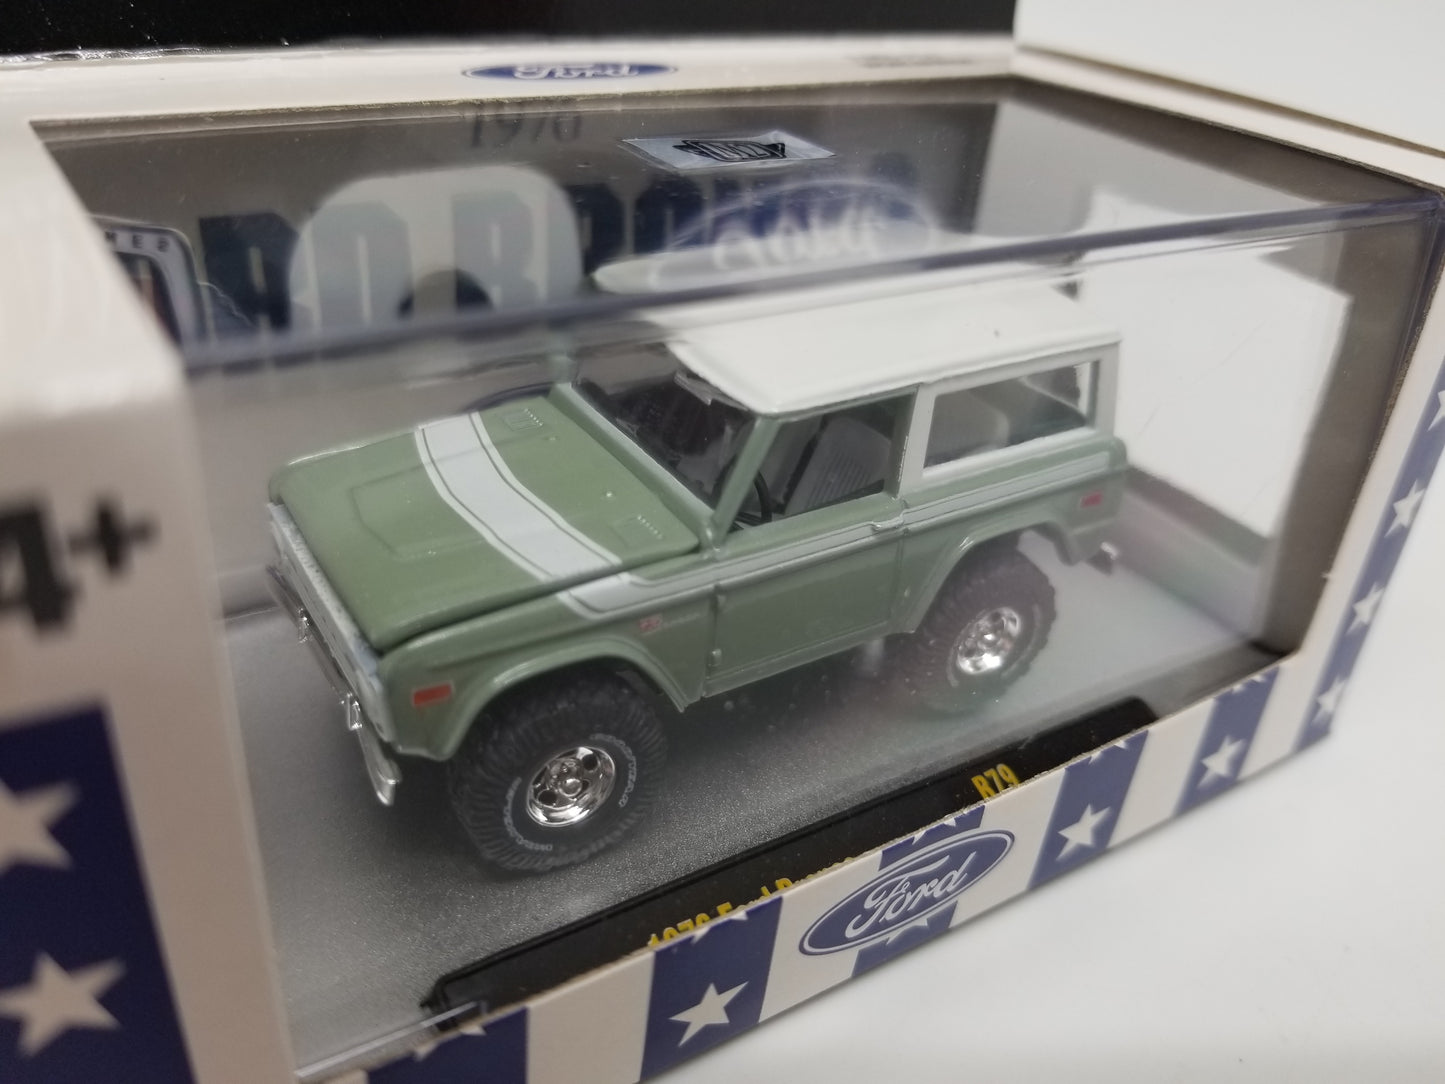 M2 1976 Ford Bronco - FORD